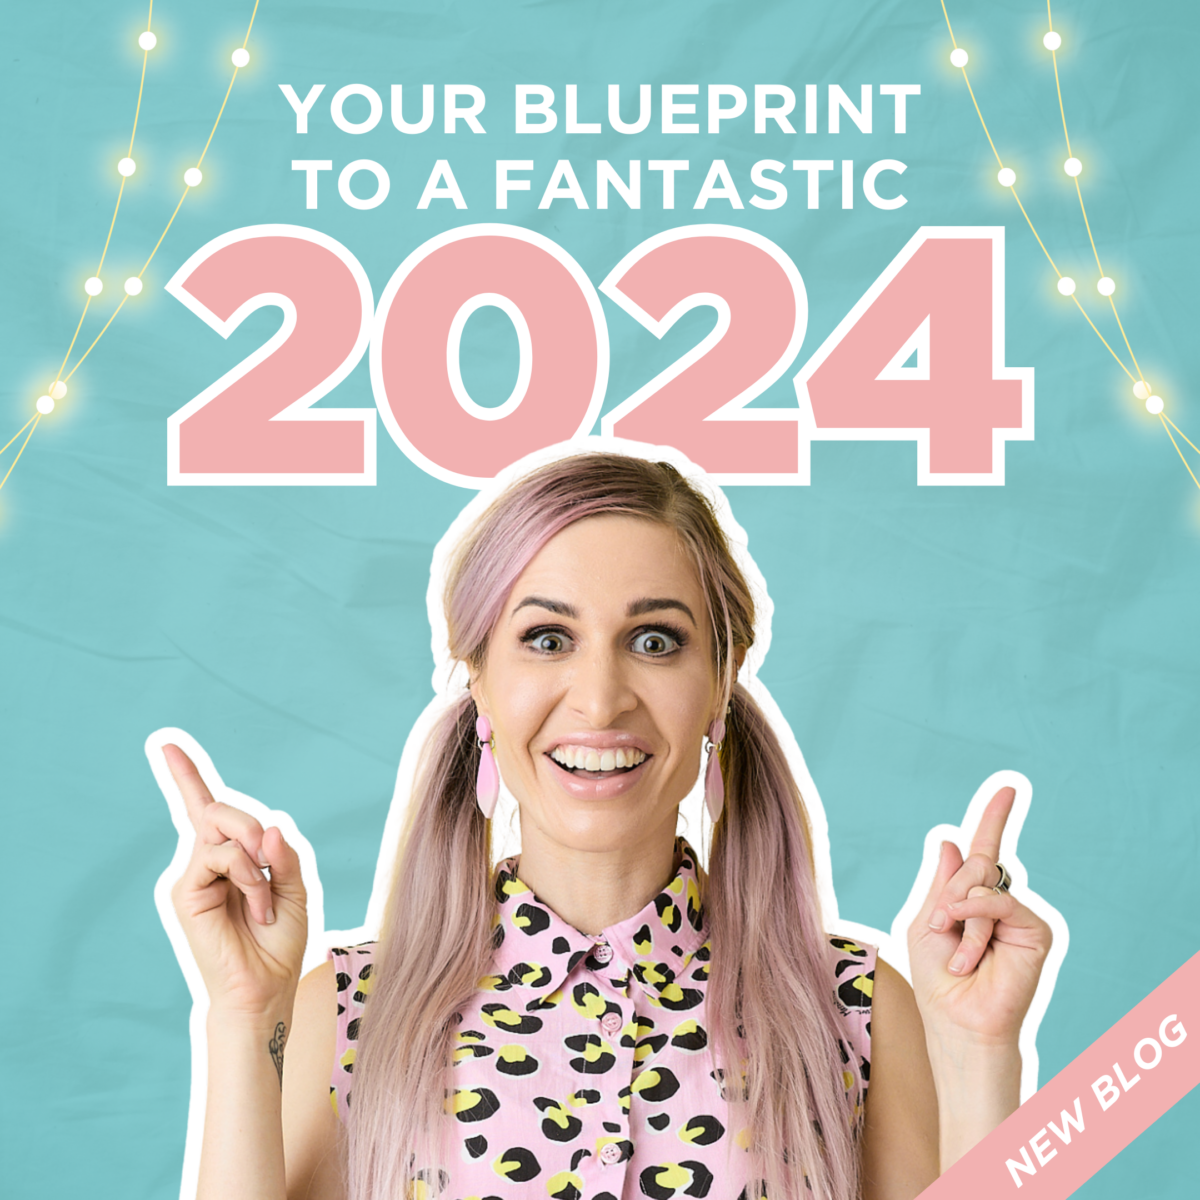 Your Blueprint to a Fantastic 2024